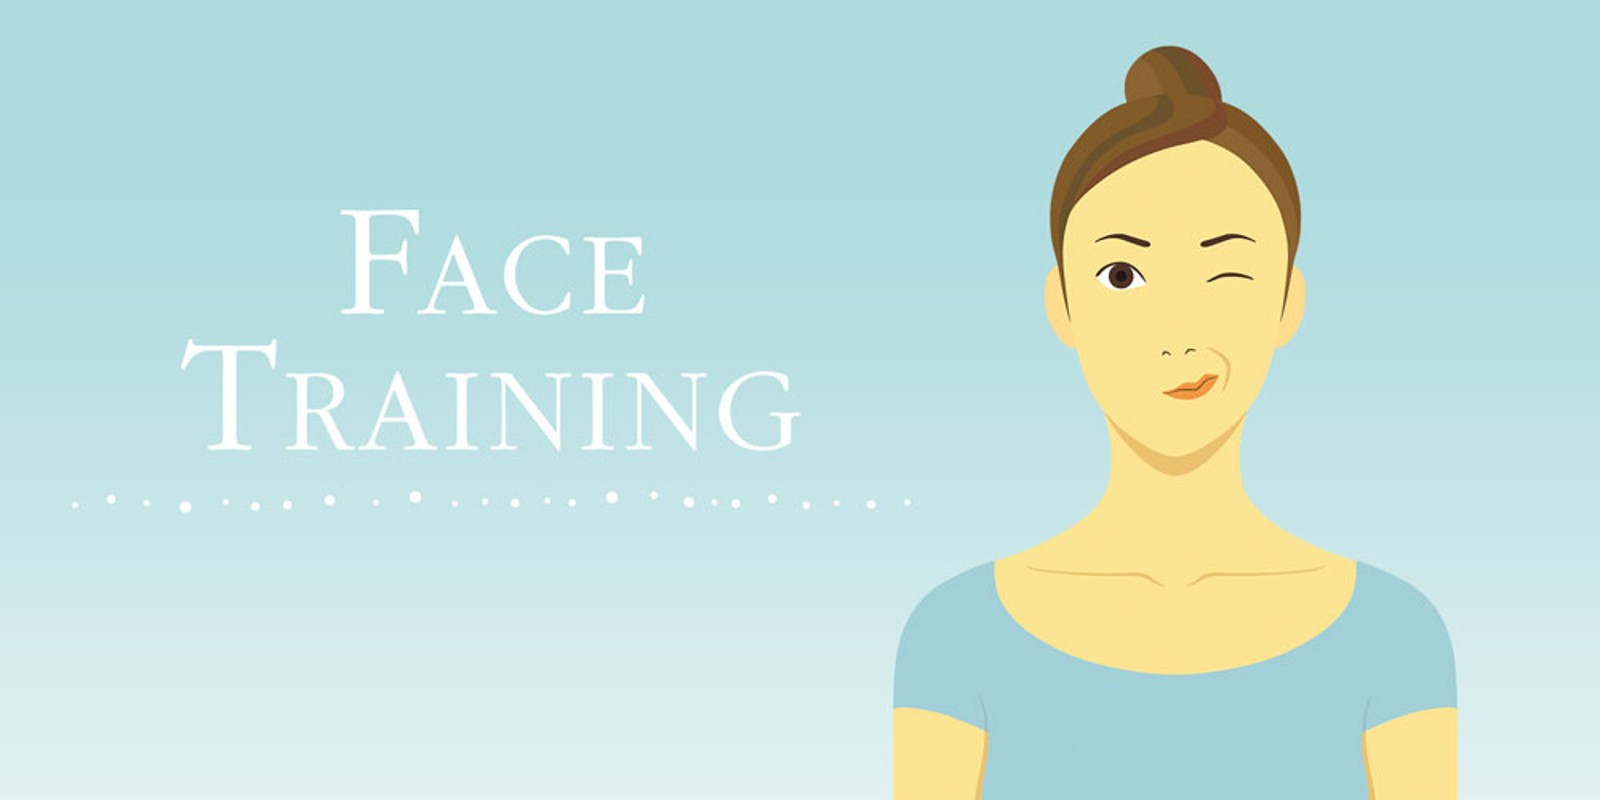 Face Training Facial exercises to strengthen and relax from Fumiko Inudo